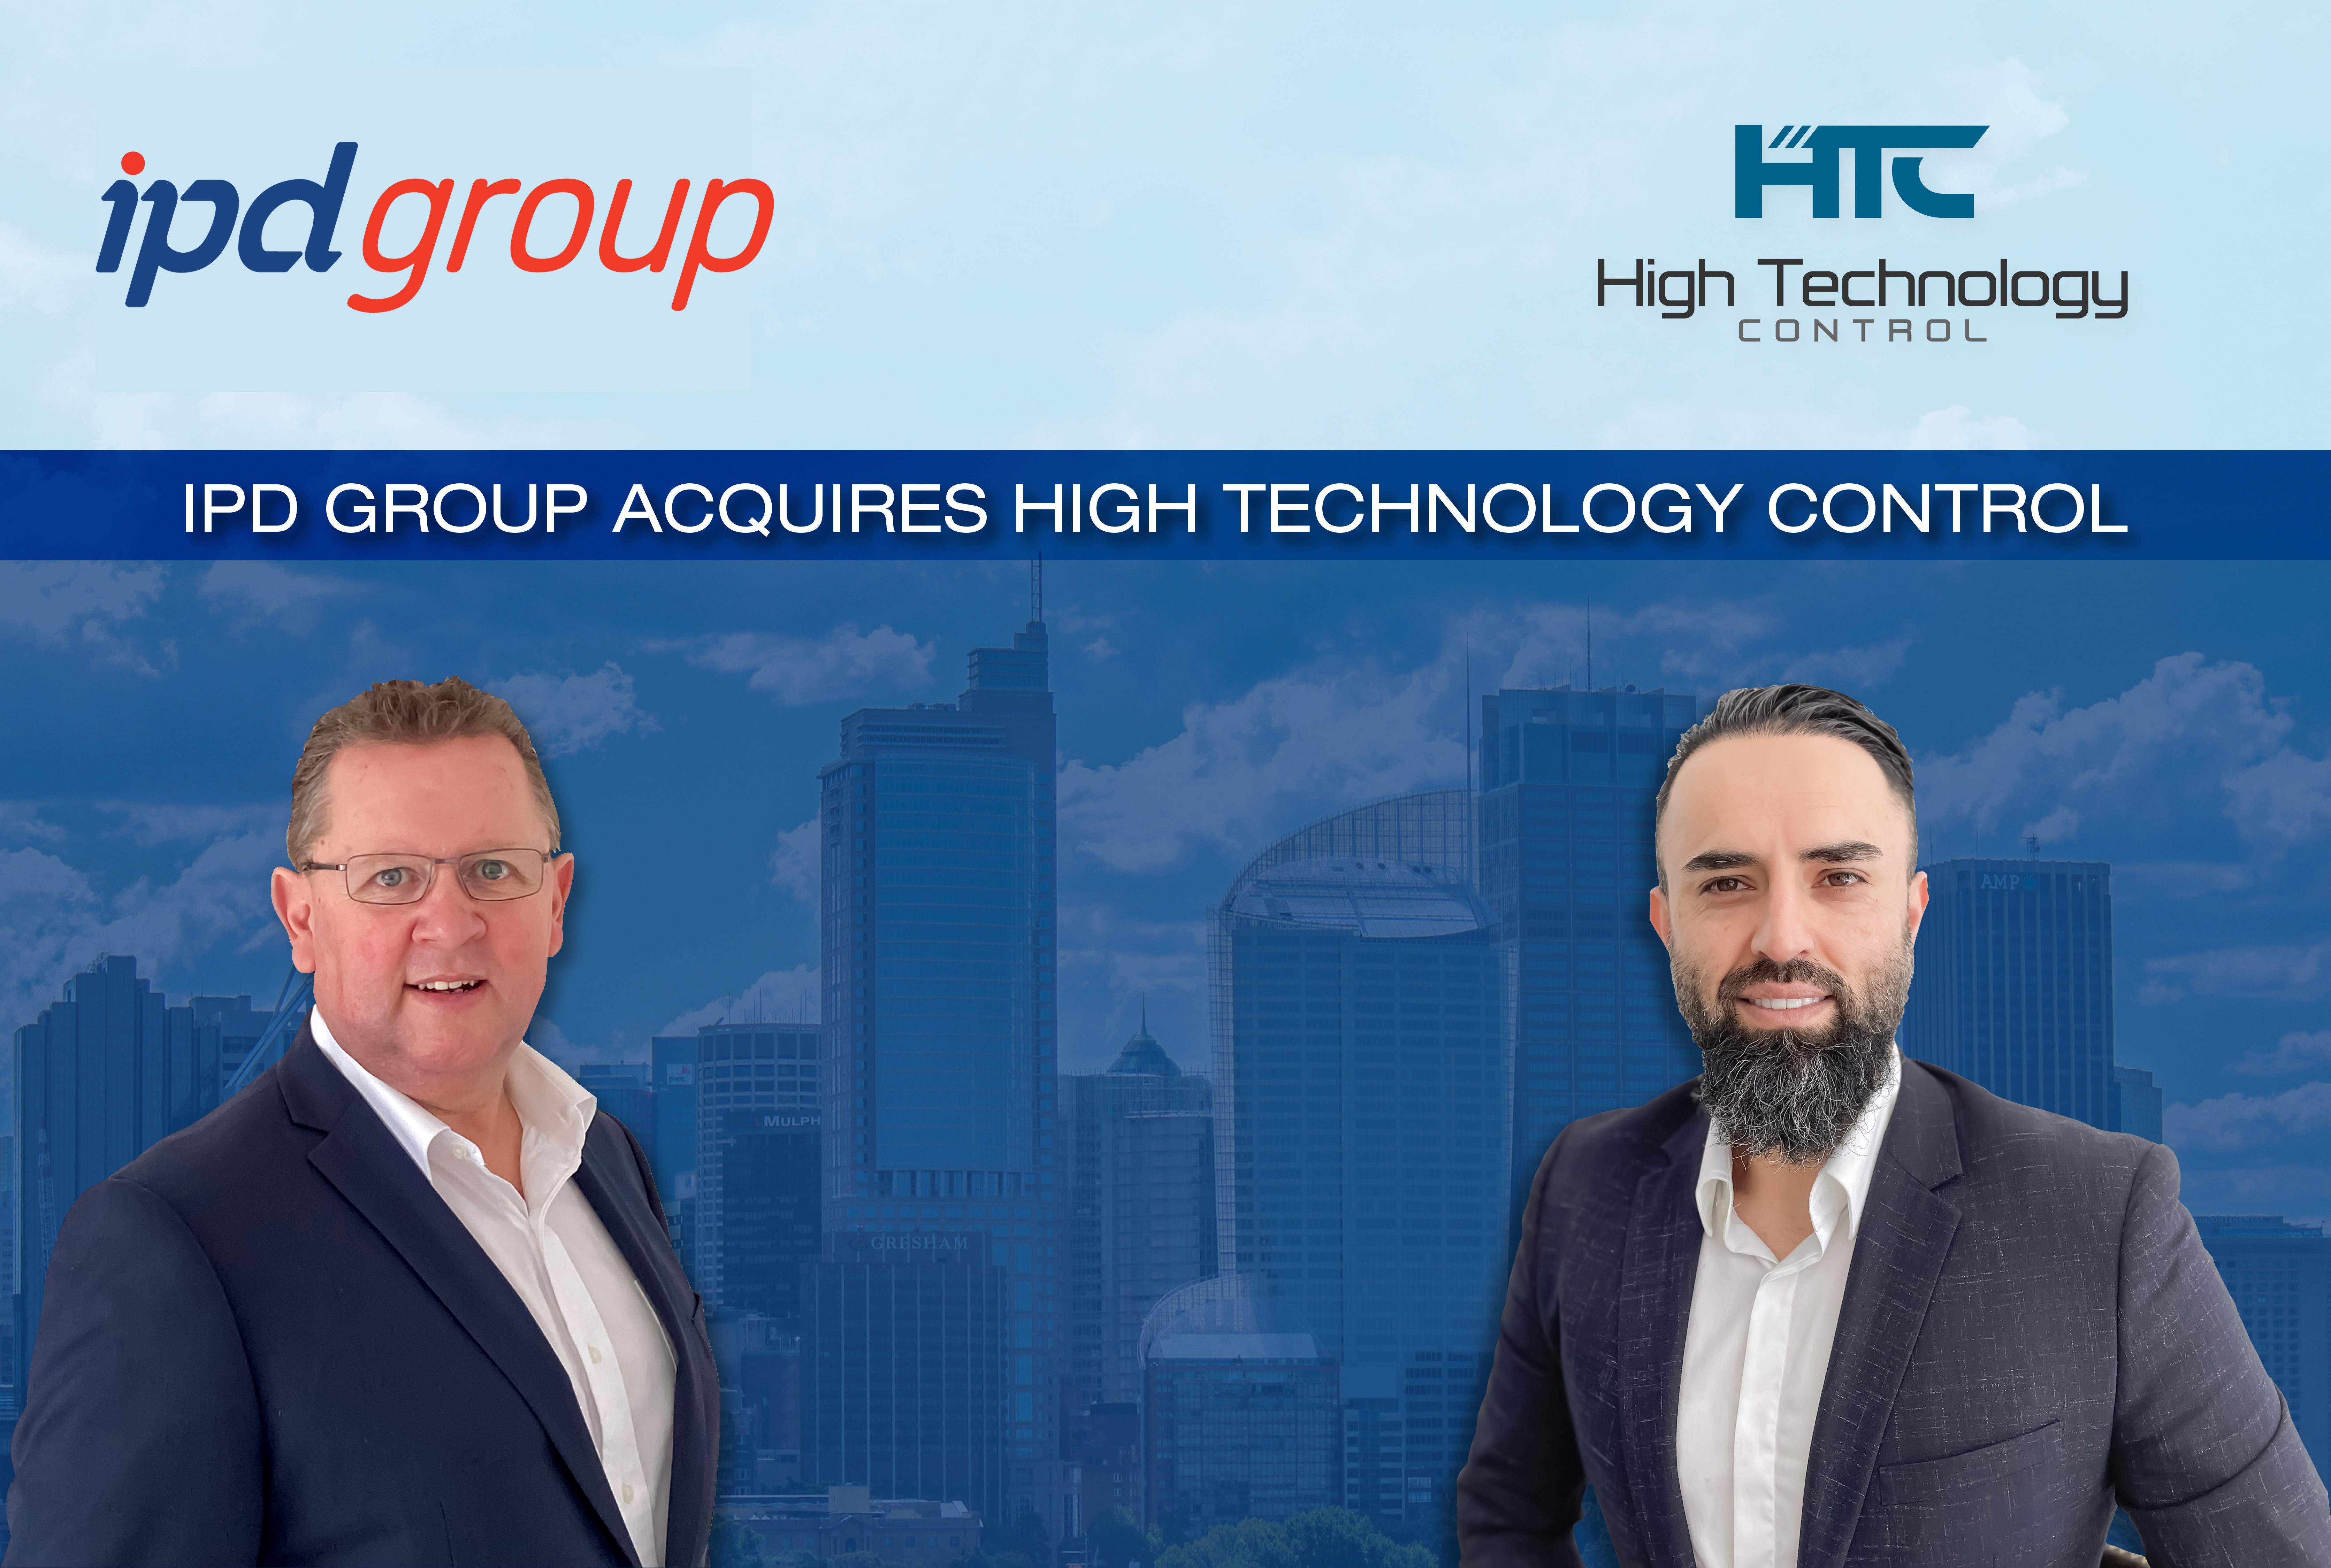 IPD Group acquires High Technology Control